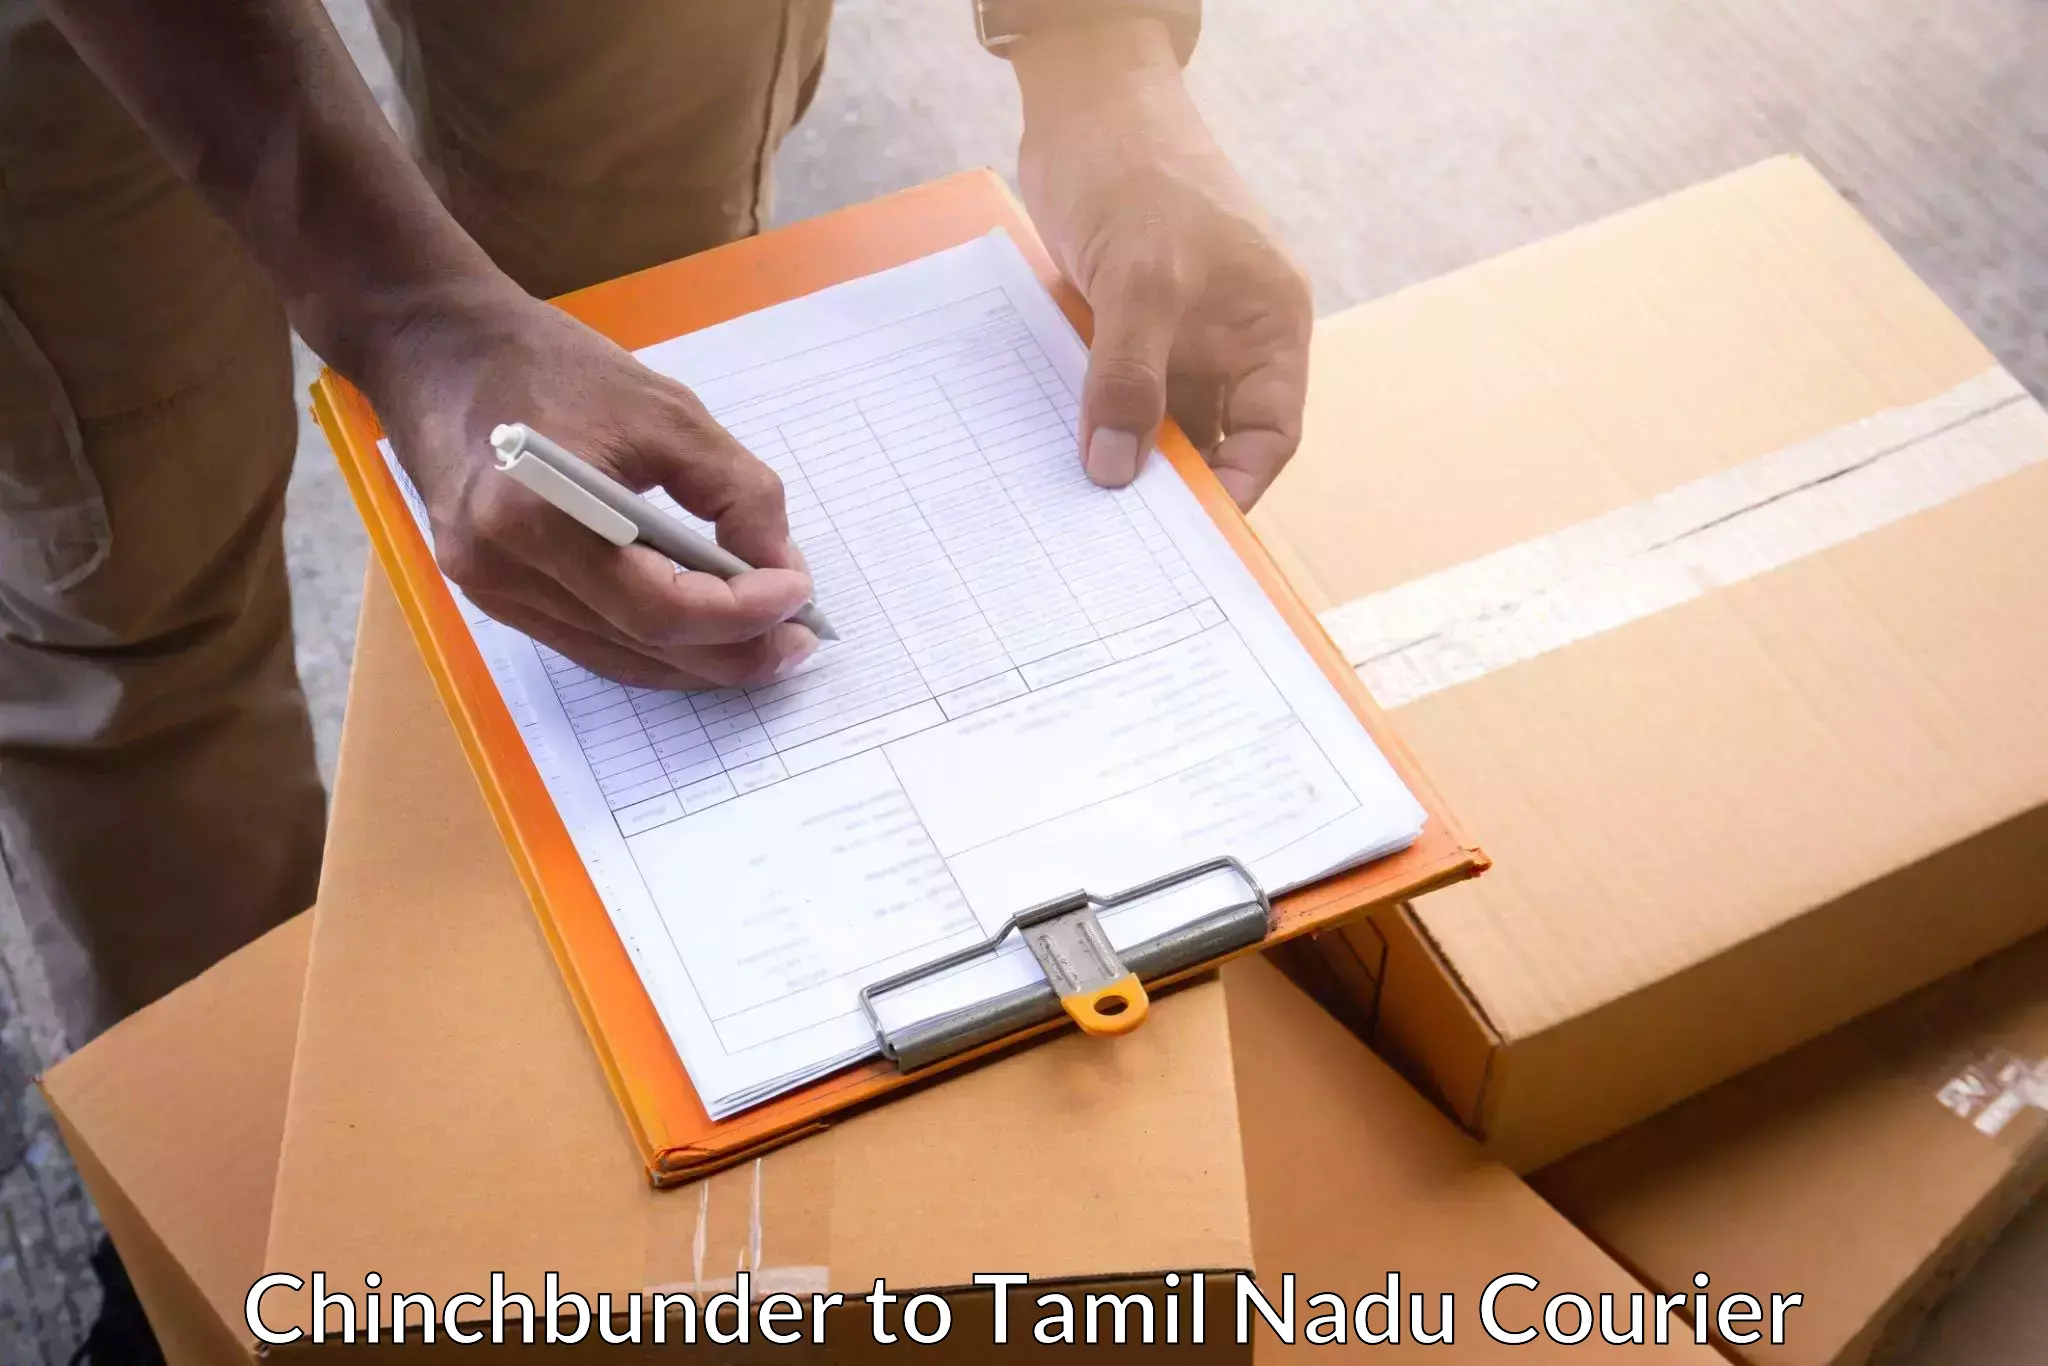 Multi-national courier services Chinchbunder to Perambalur